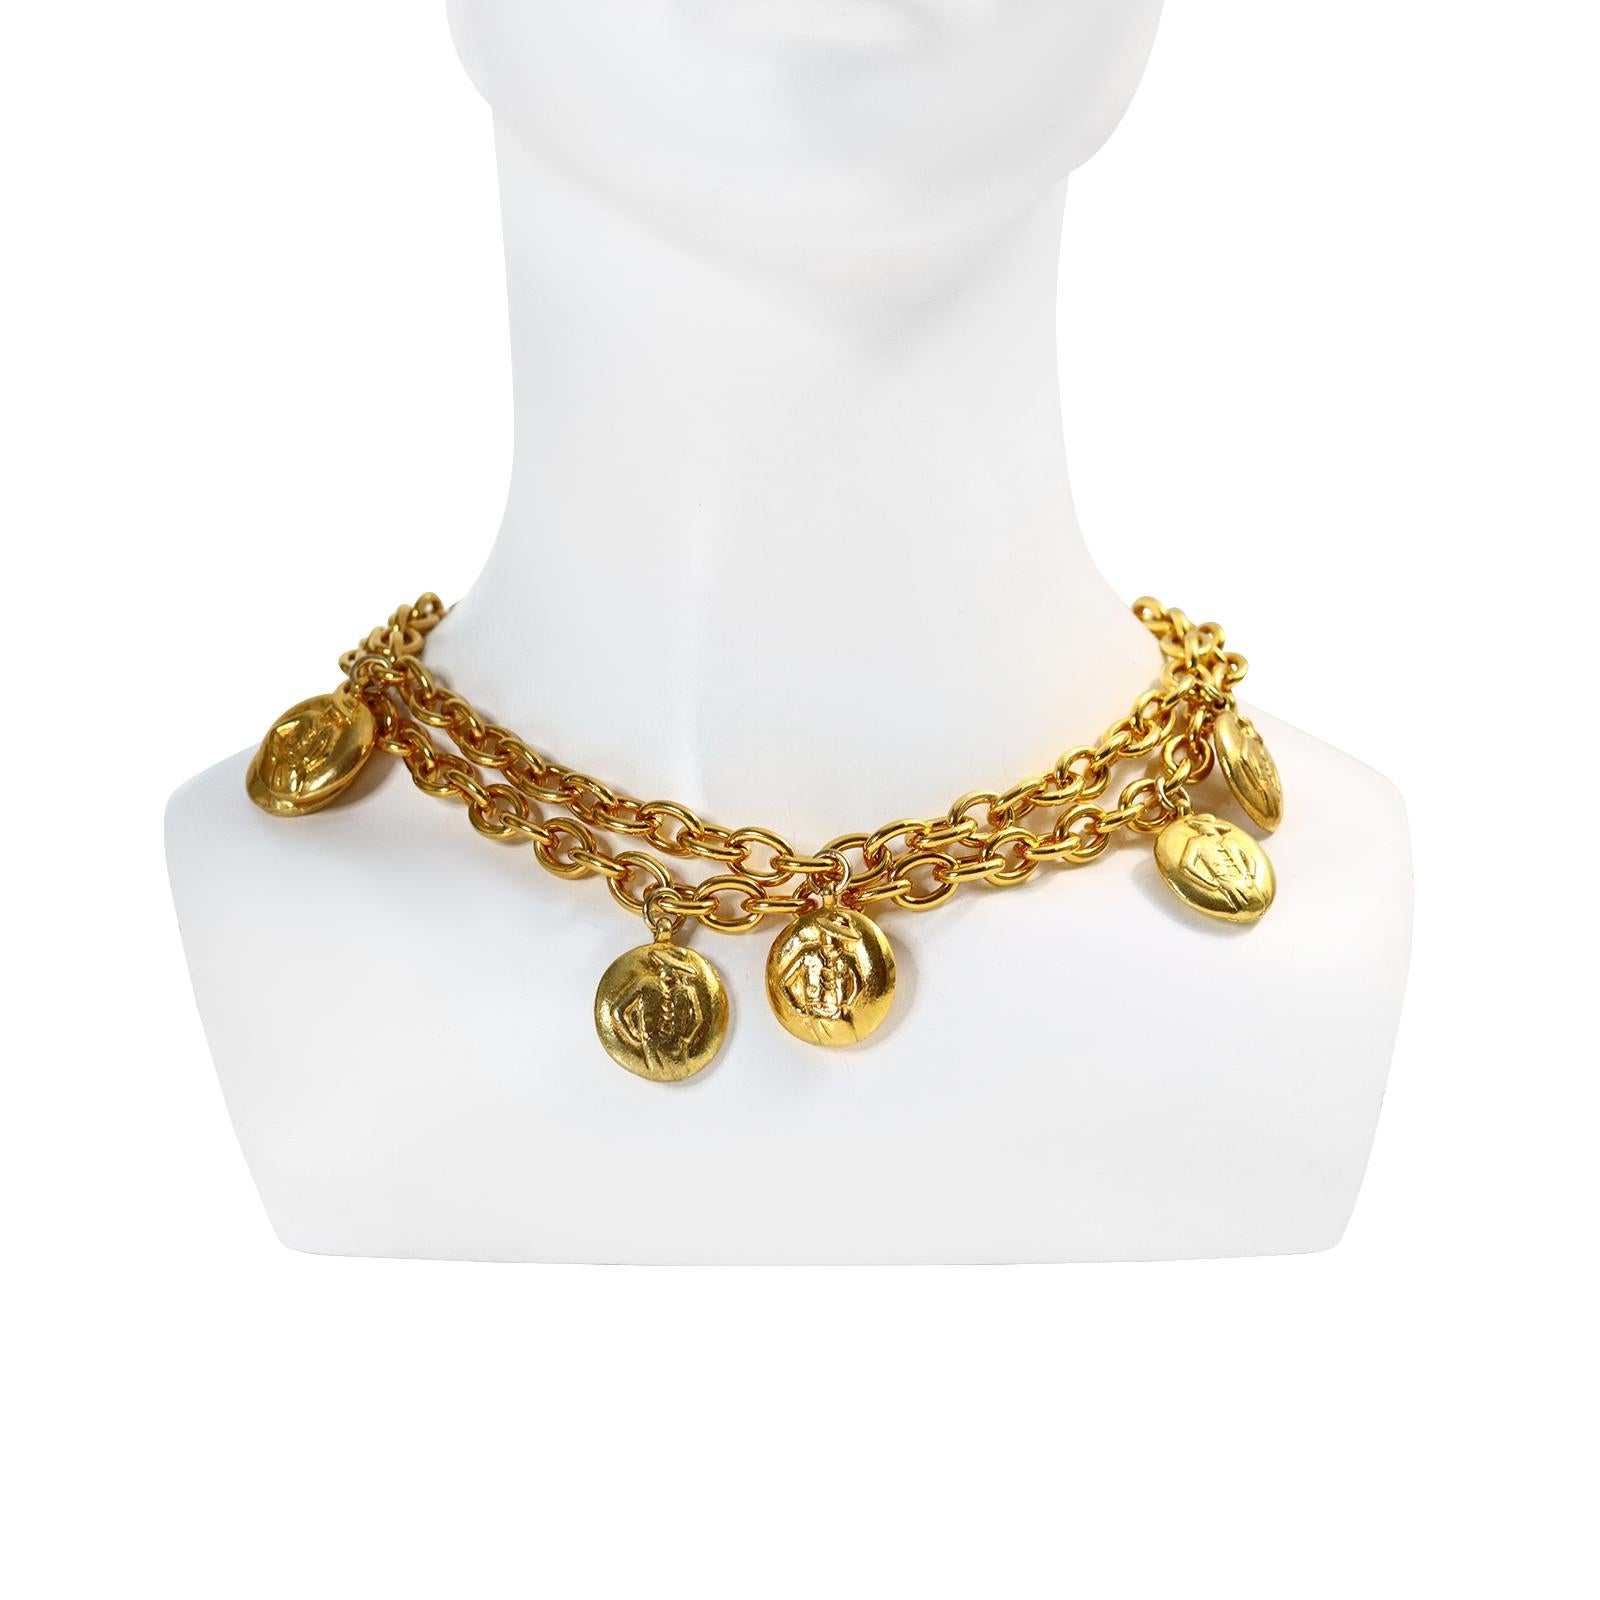 Vintage Chanel Gold Disc Chanel and Coco on Long Necklace Circa 1980s For Sale 5